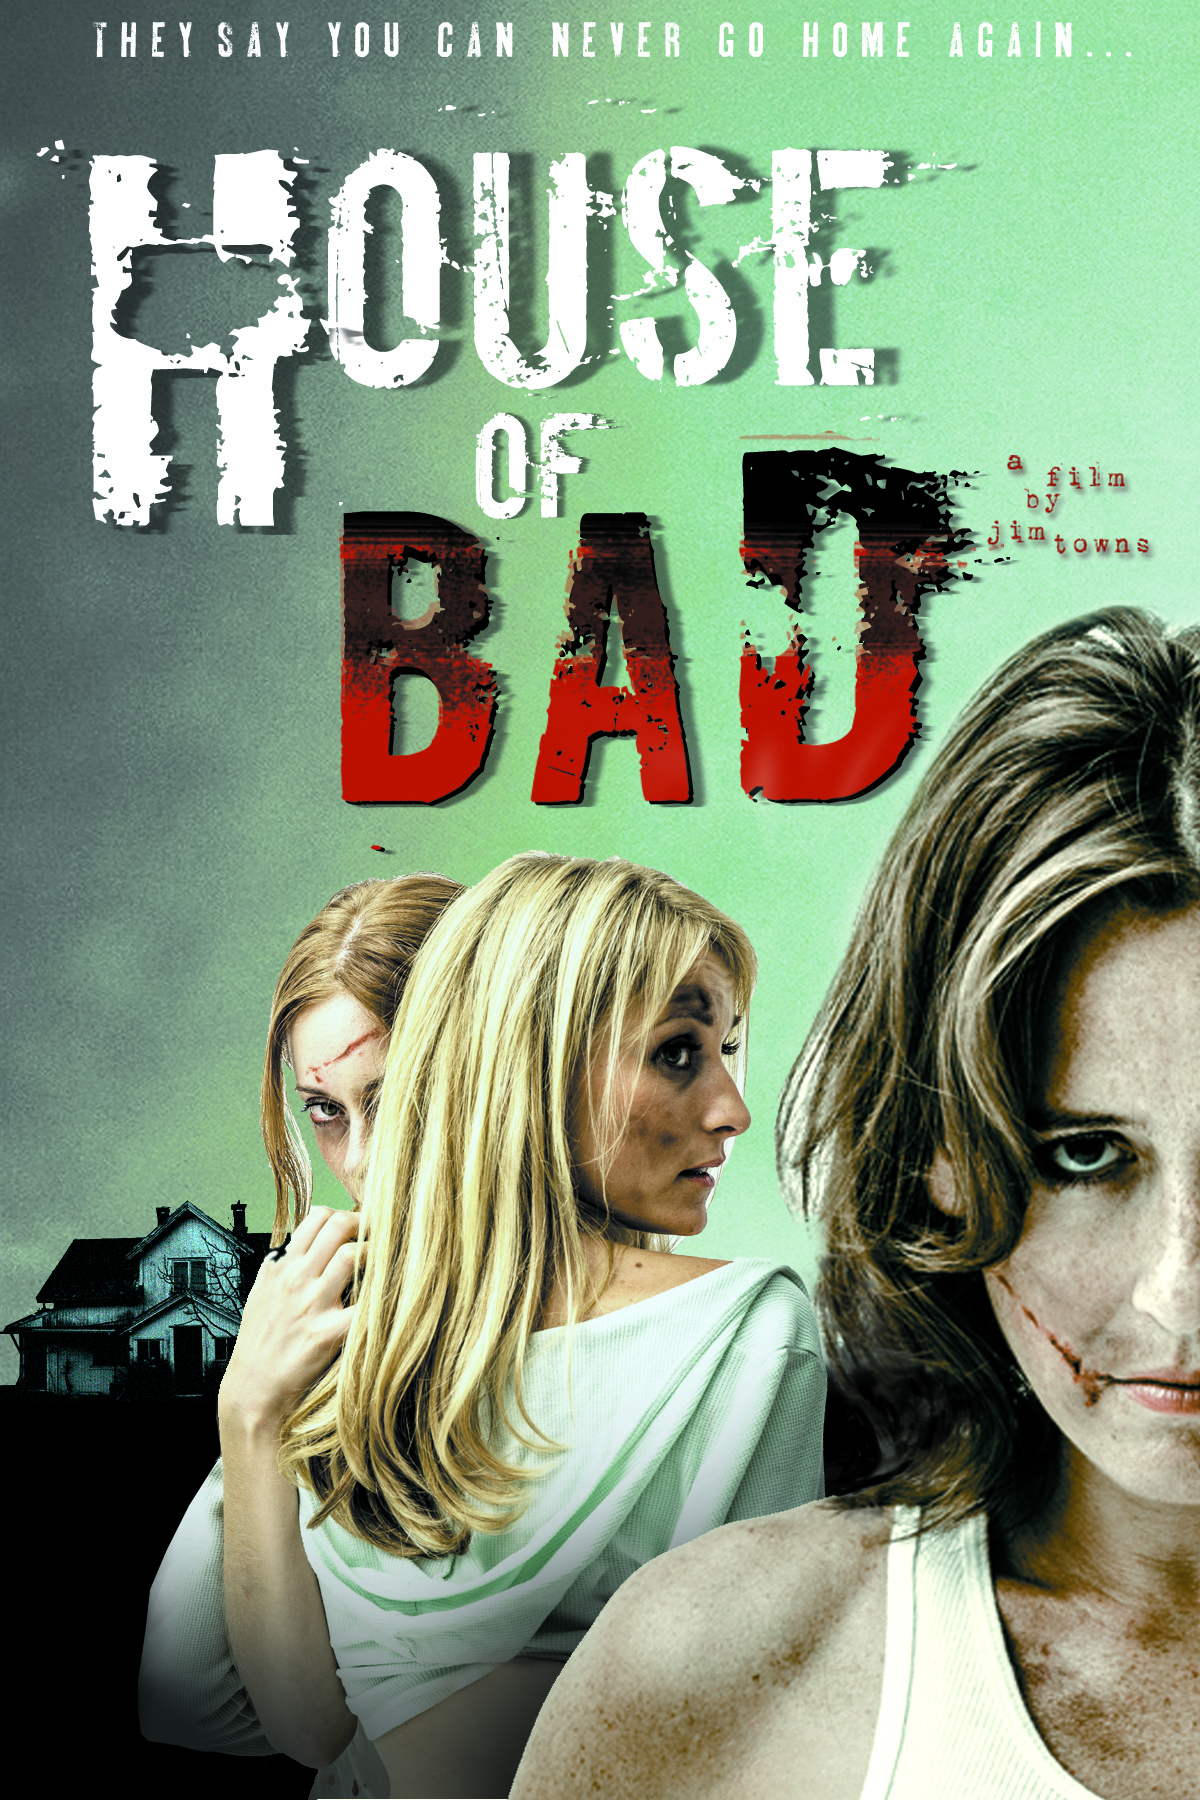 House of Bad (2012)- written and directed by Jim Towns